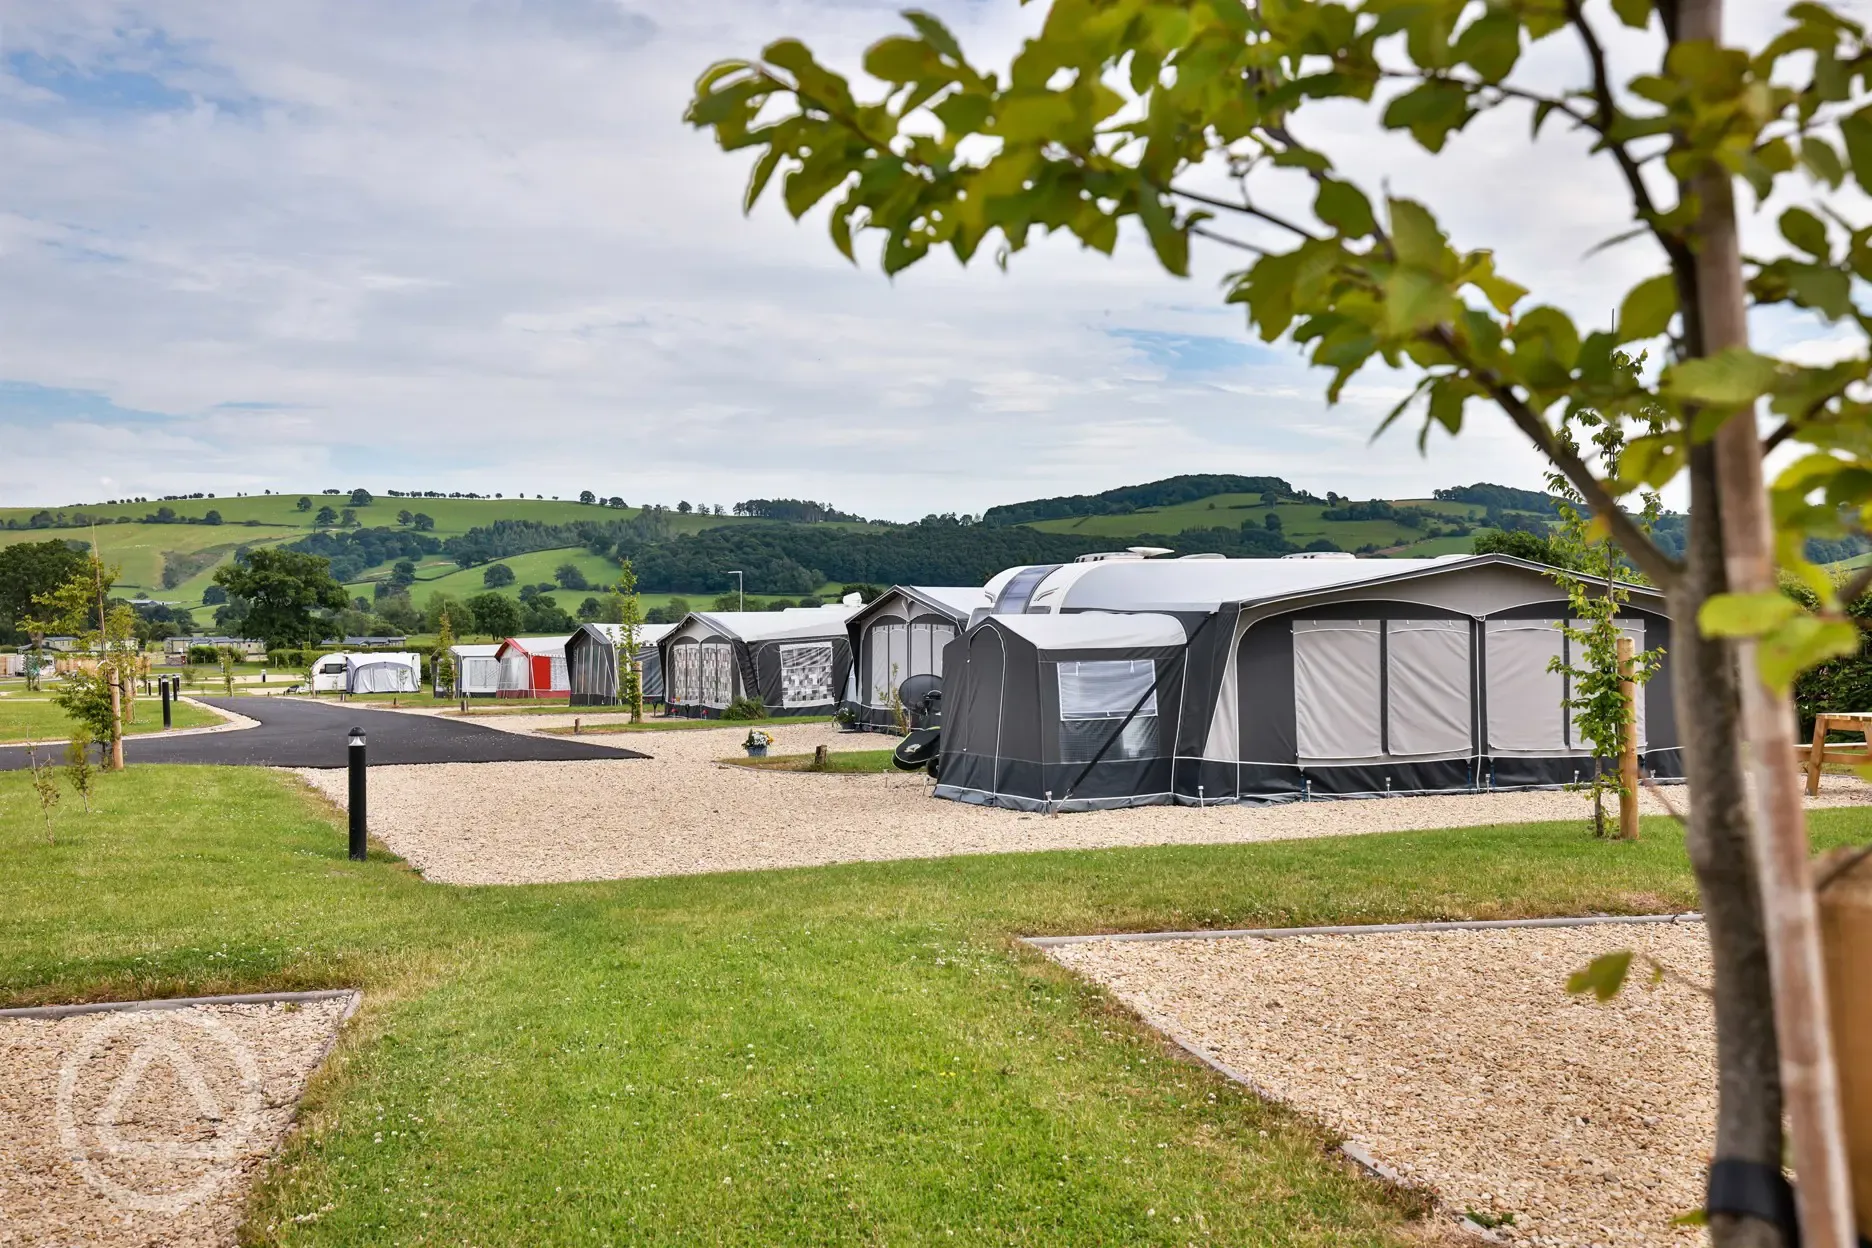 Fully serviced hardstanding pitches